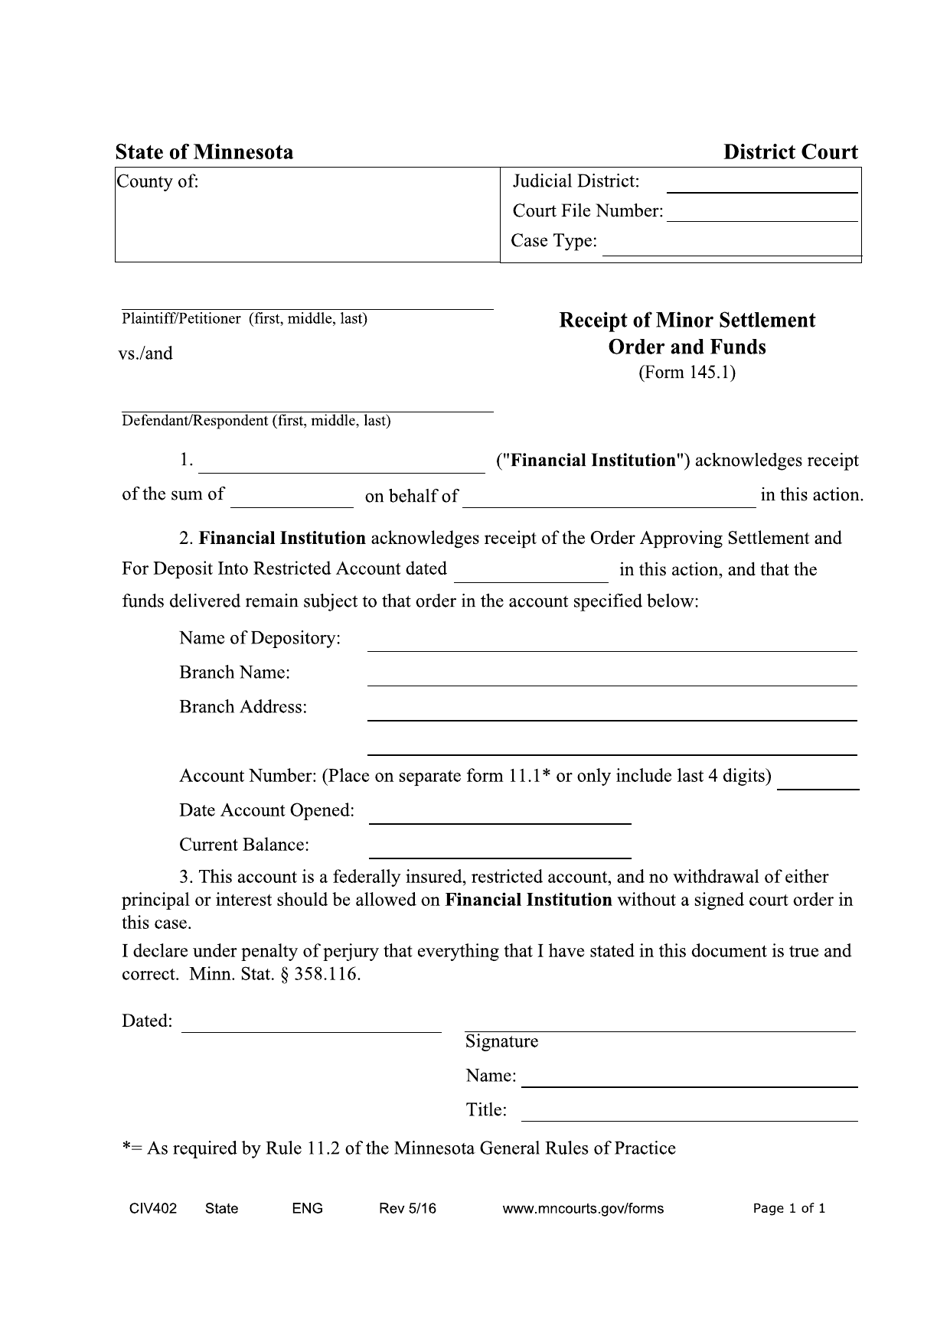 Form 145.1 (CIV402) Receipt of Minor Settlement Order and Funds - Minnesota, Page 1